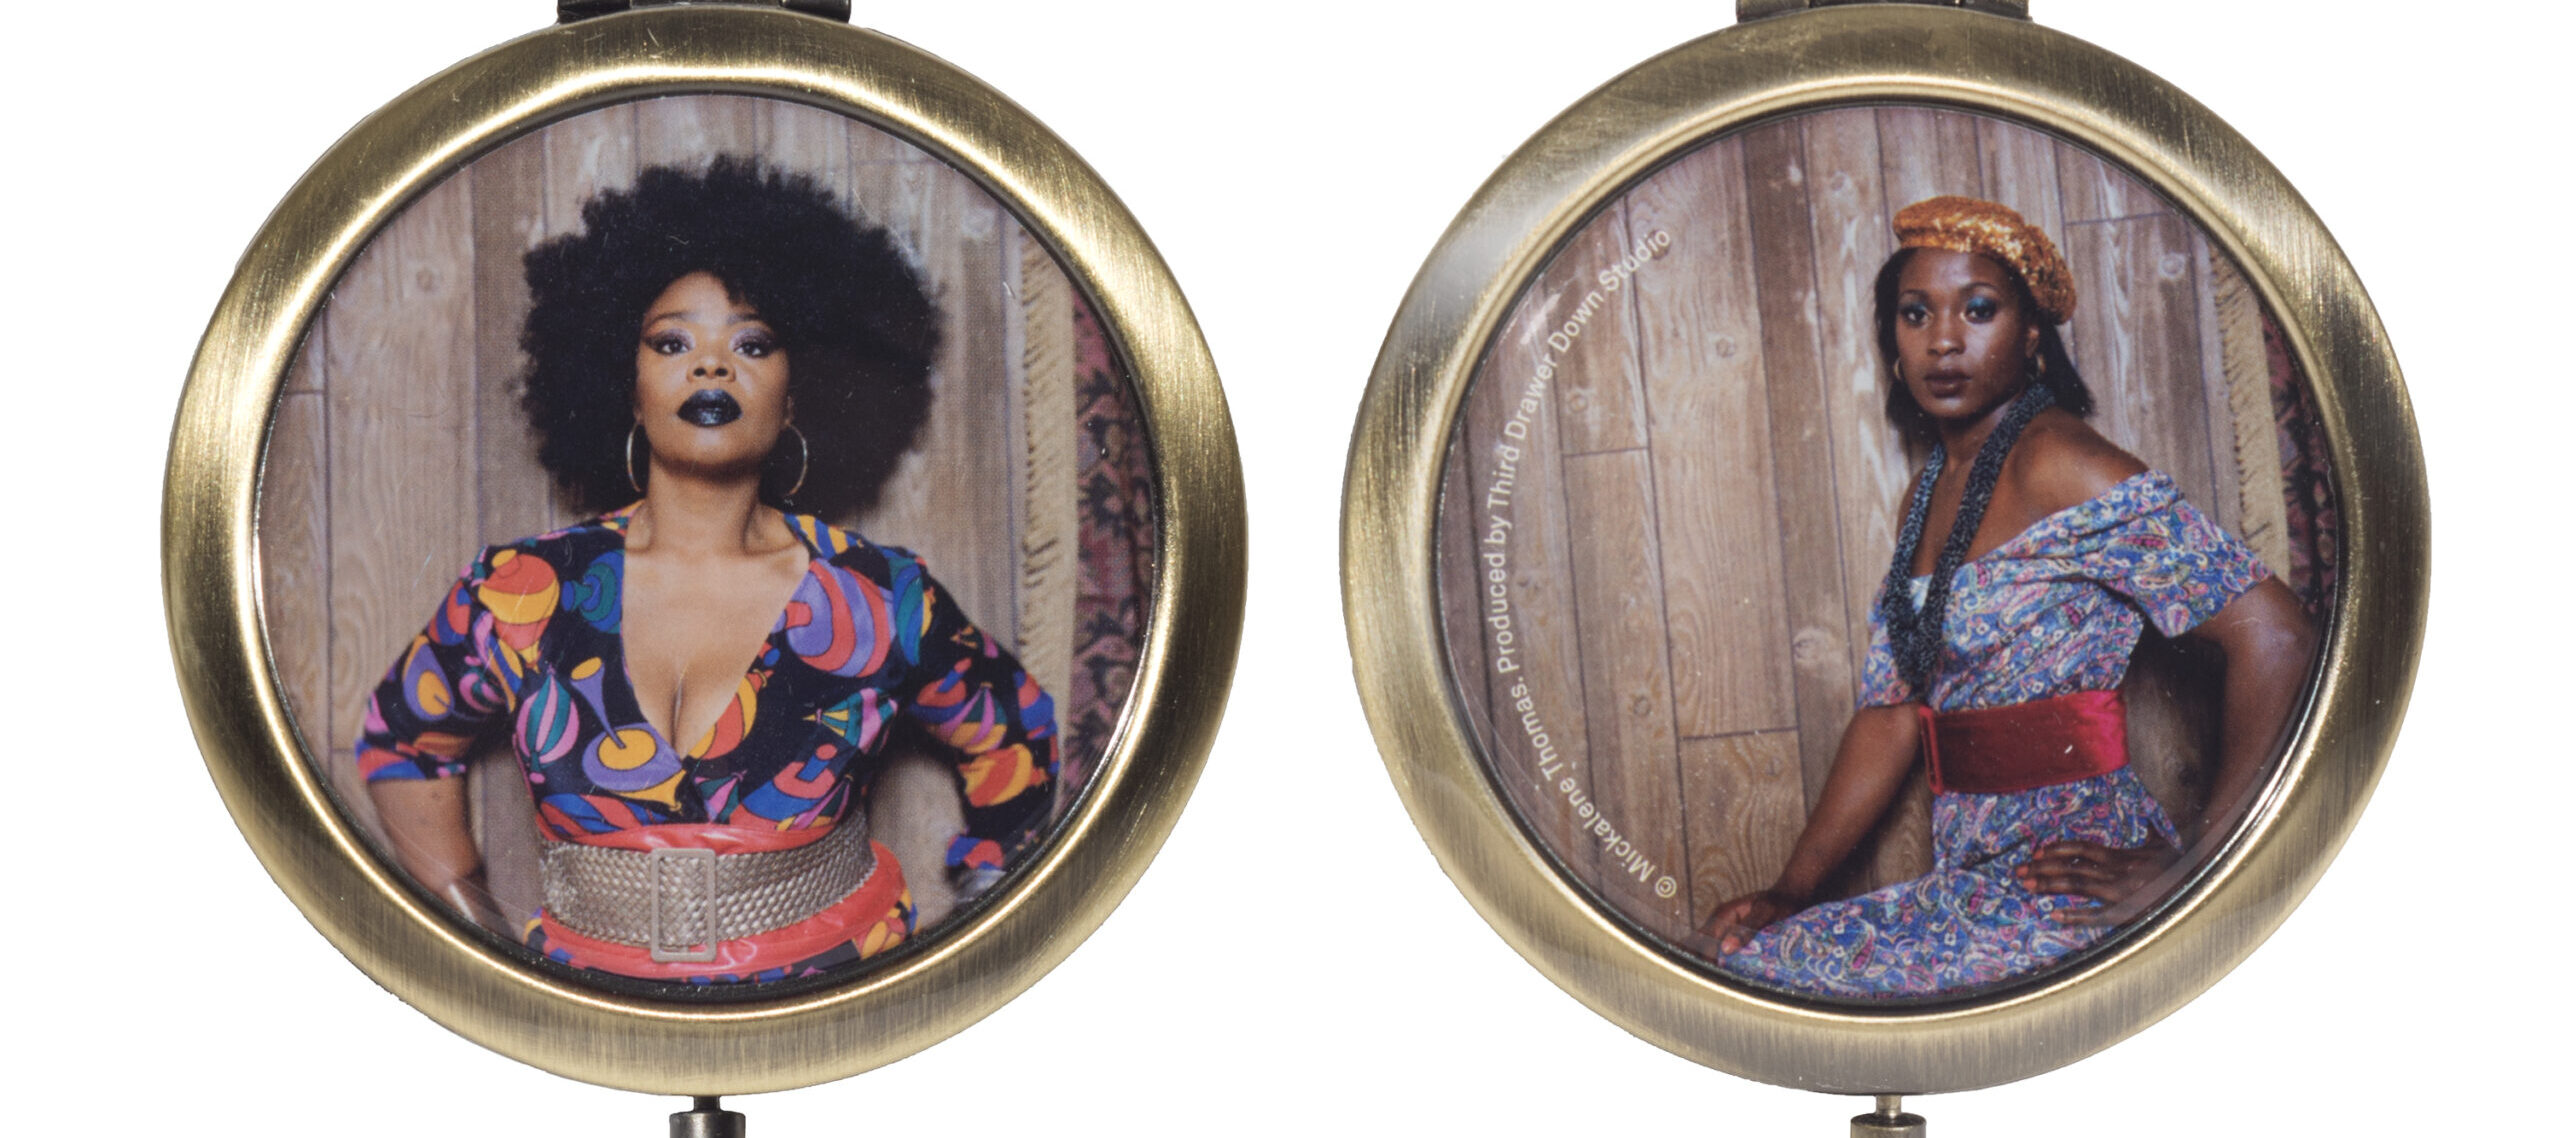 Two sides of a compact mirror, each featuring a photographic portrait of a black woman.